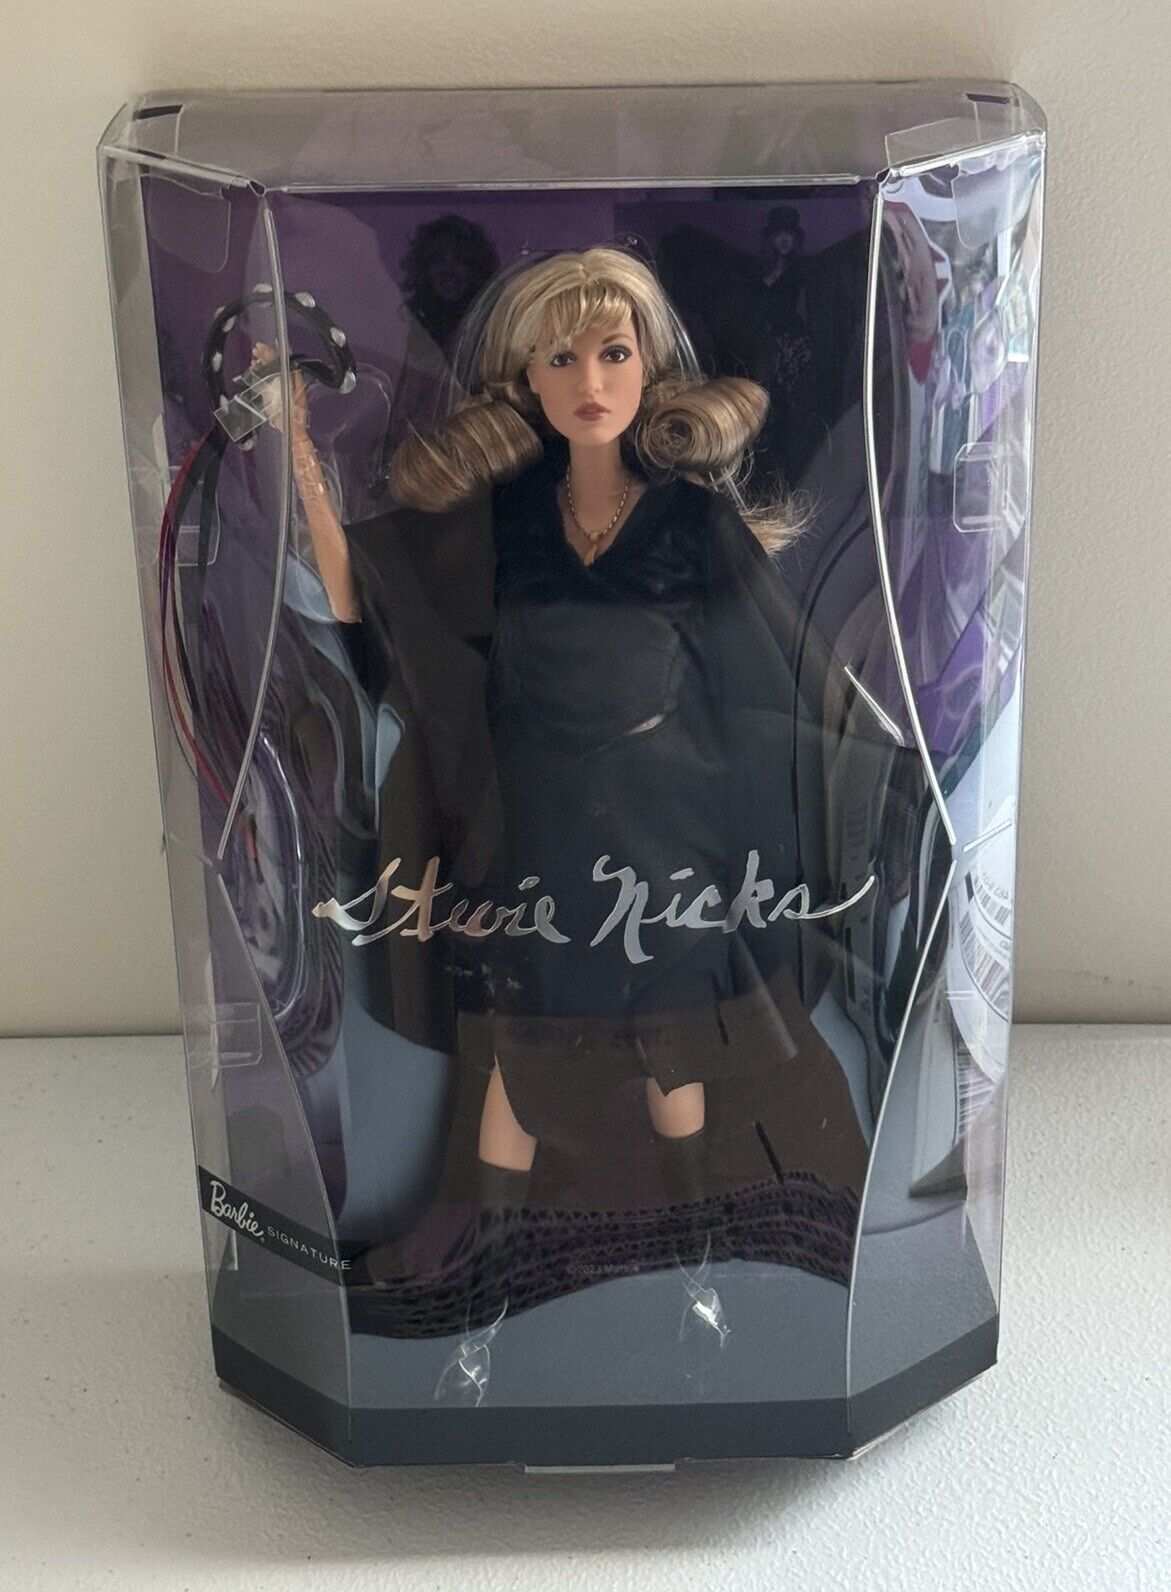 Barbie Stevie Nicks Doll Signature Music Series Doll - Brand New - In Hand